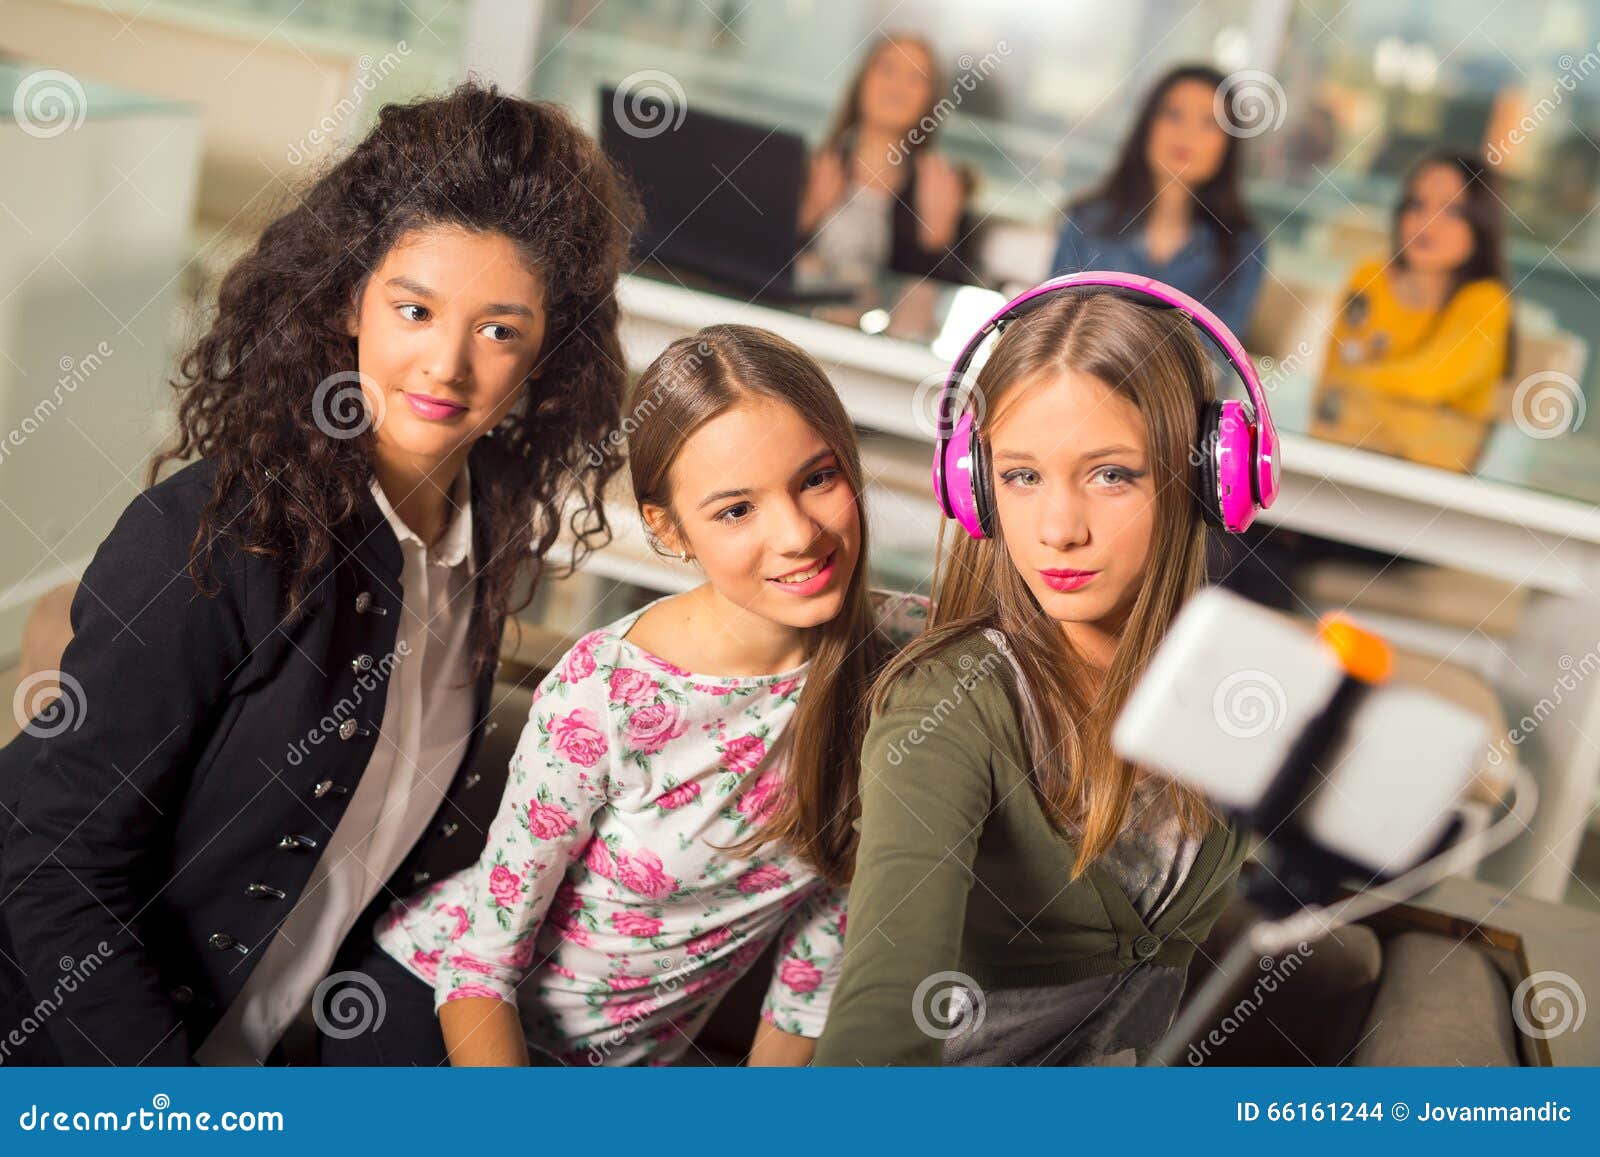 Teen girls hanging out